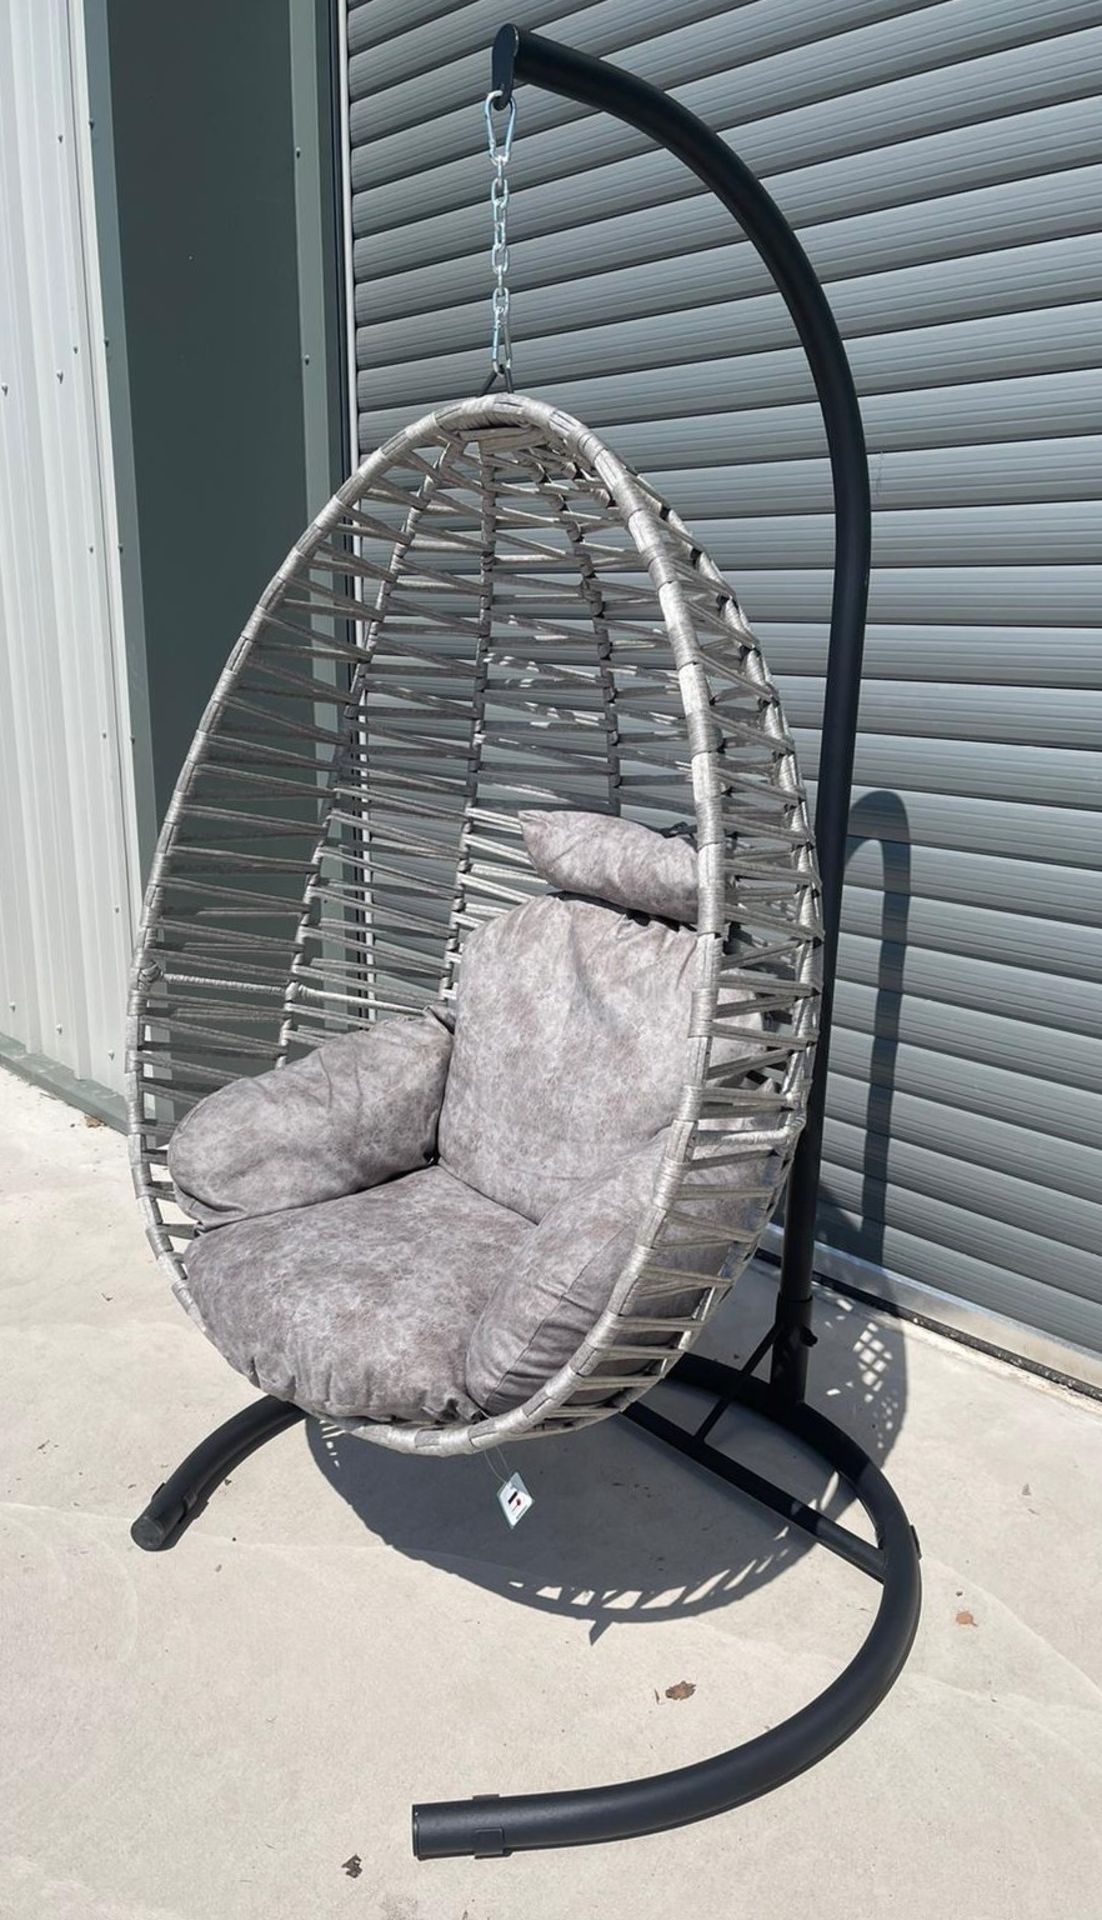 RRP £399 - Large Grey Woven Indoor/Outdoor Swinging Egg Chair - Our egg chair provides portable - Image 2 of 3